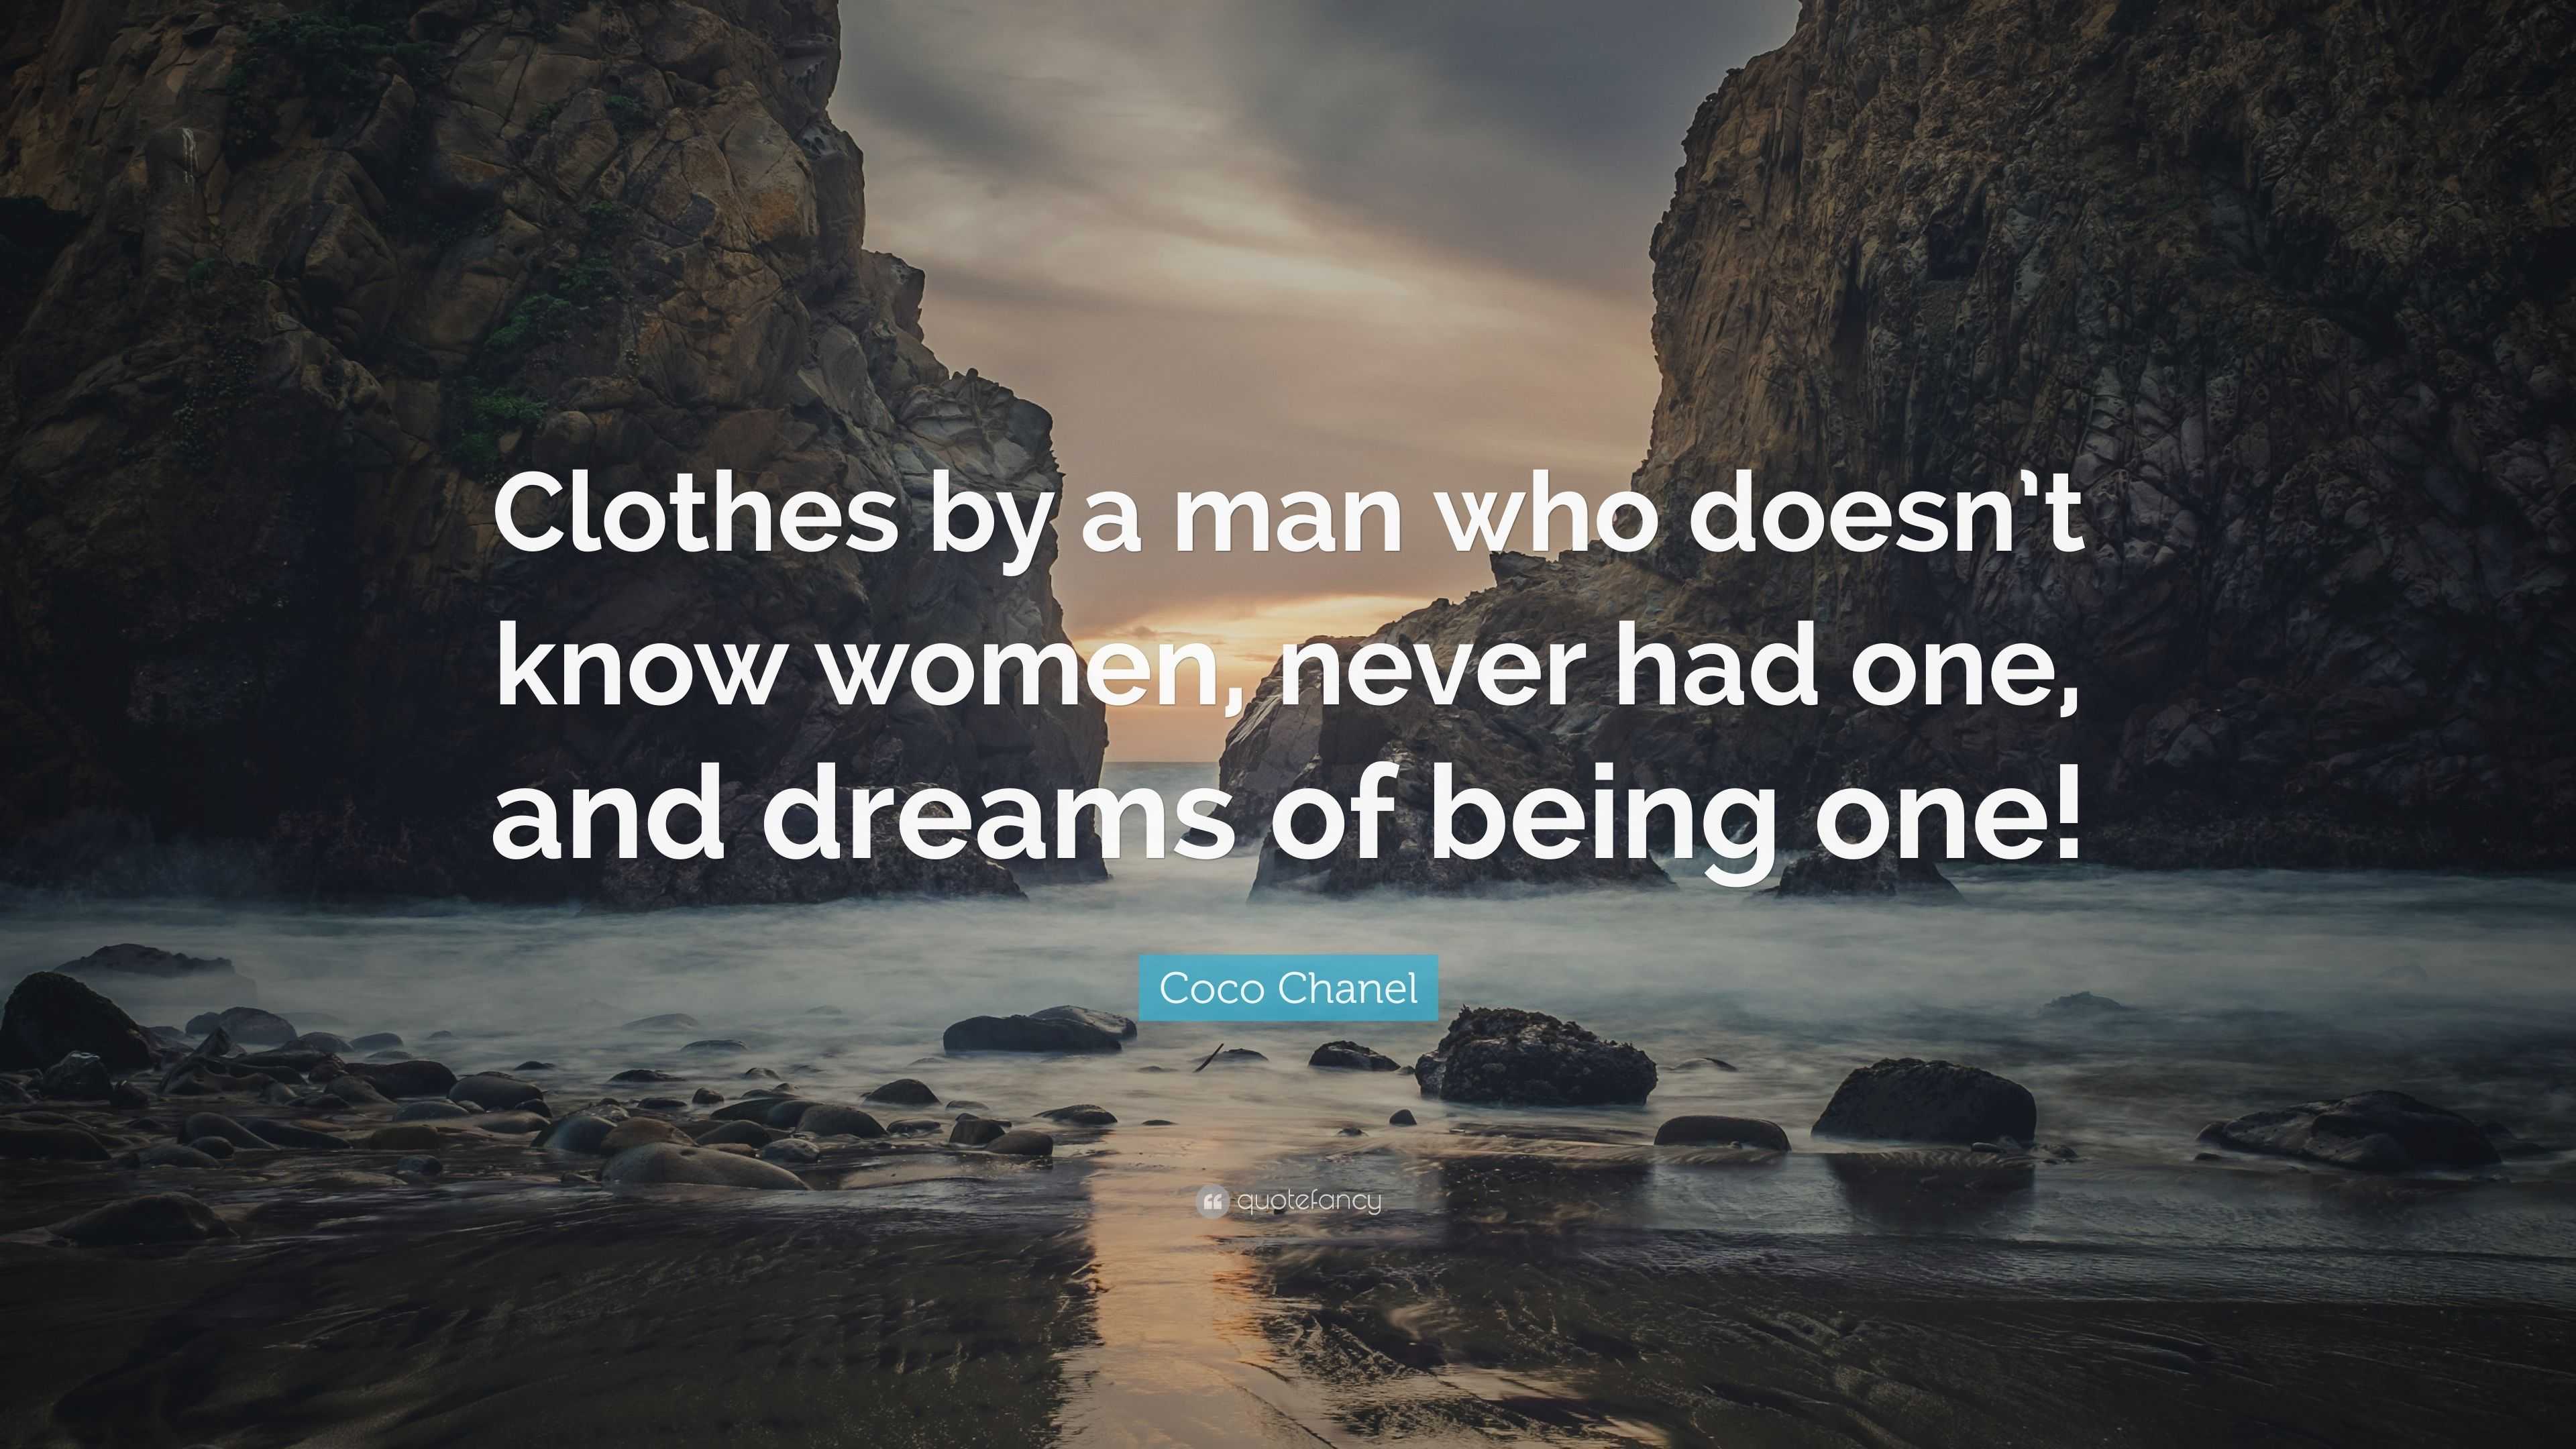 https://quotefancy.com/media/wallpaper/3840x2160/5613258-Coco-Chanel-Quote-Clothes-by-a-man-who-doesn-t-know-women-never.jpg